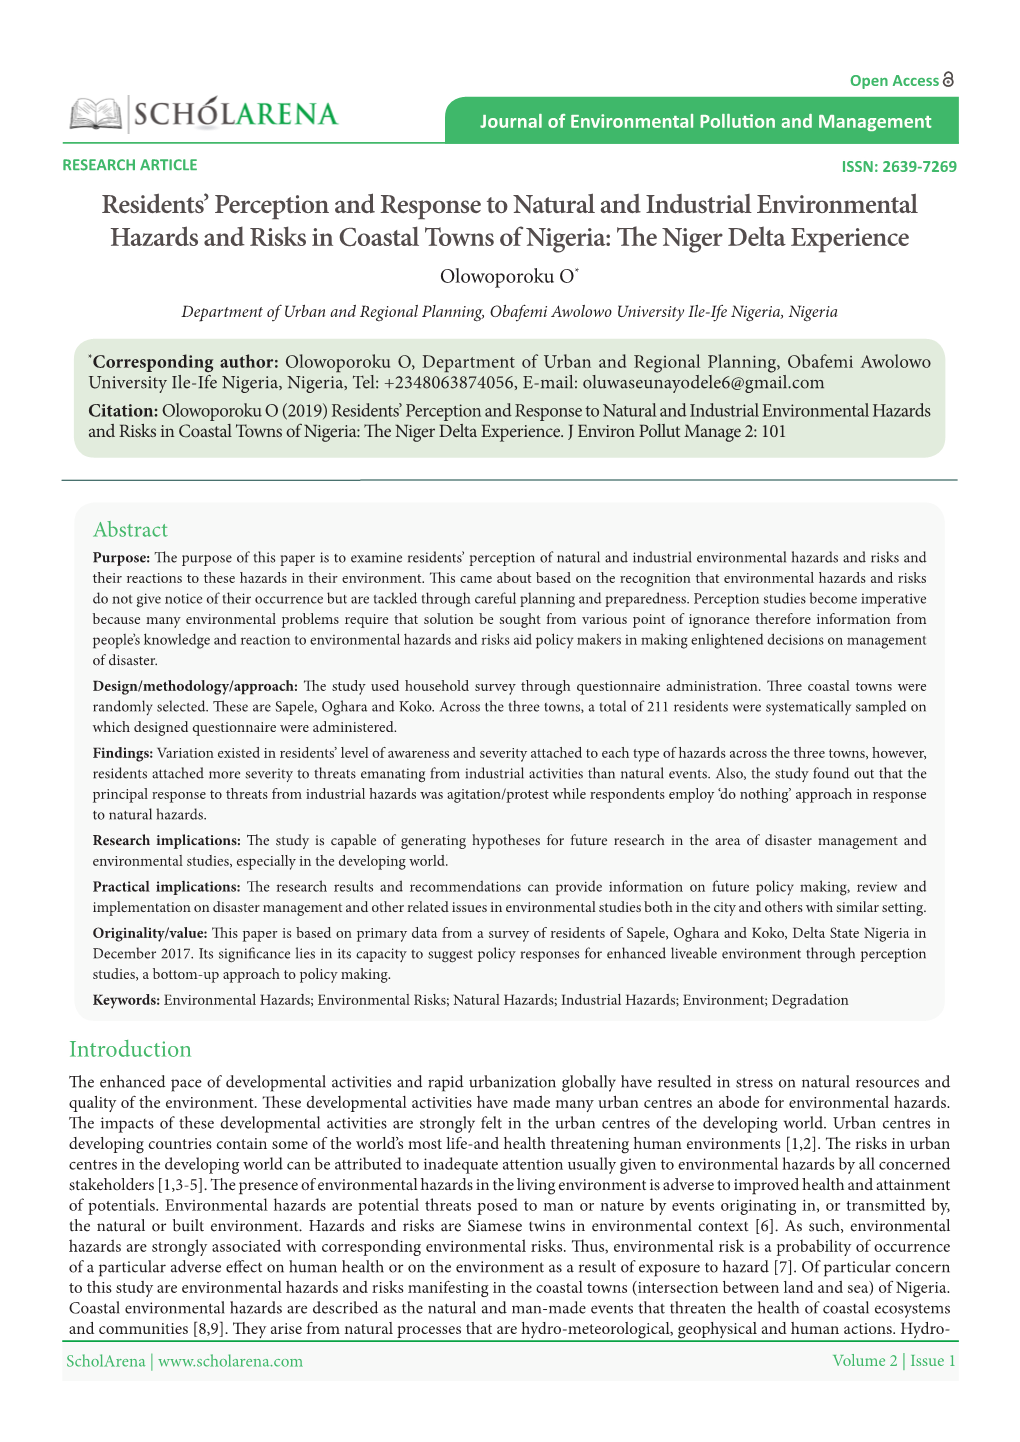 Residents' Perception and Response to Natural and Industrial Environmental Hazards and Risks in Coastal Towns of Nigeria